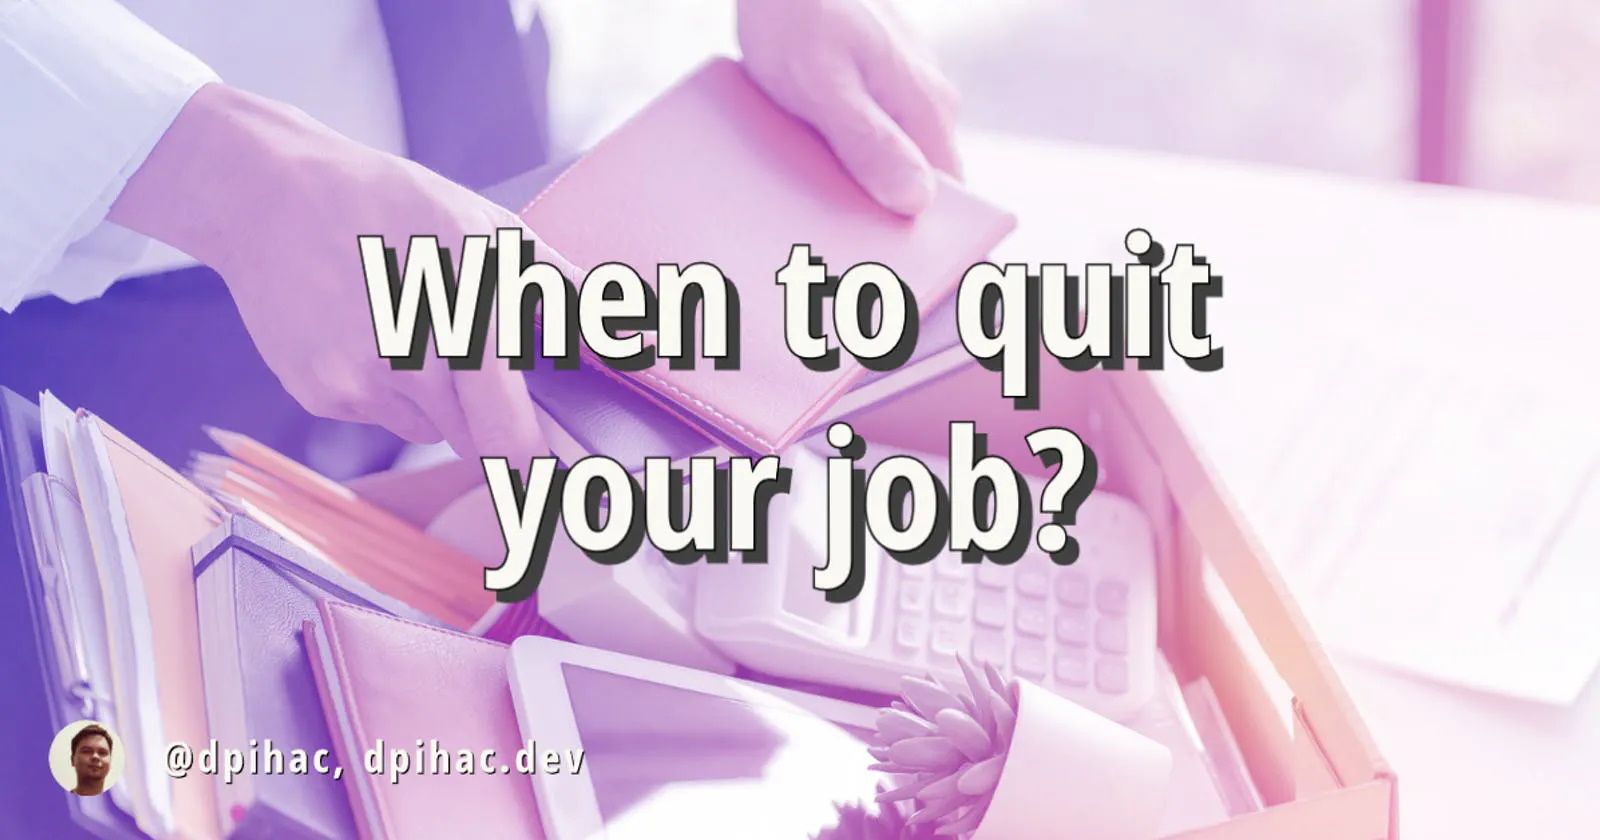 Warning Signs: When It's Time to Quit Your Job and Move On